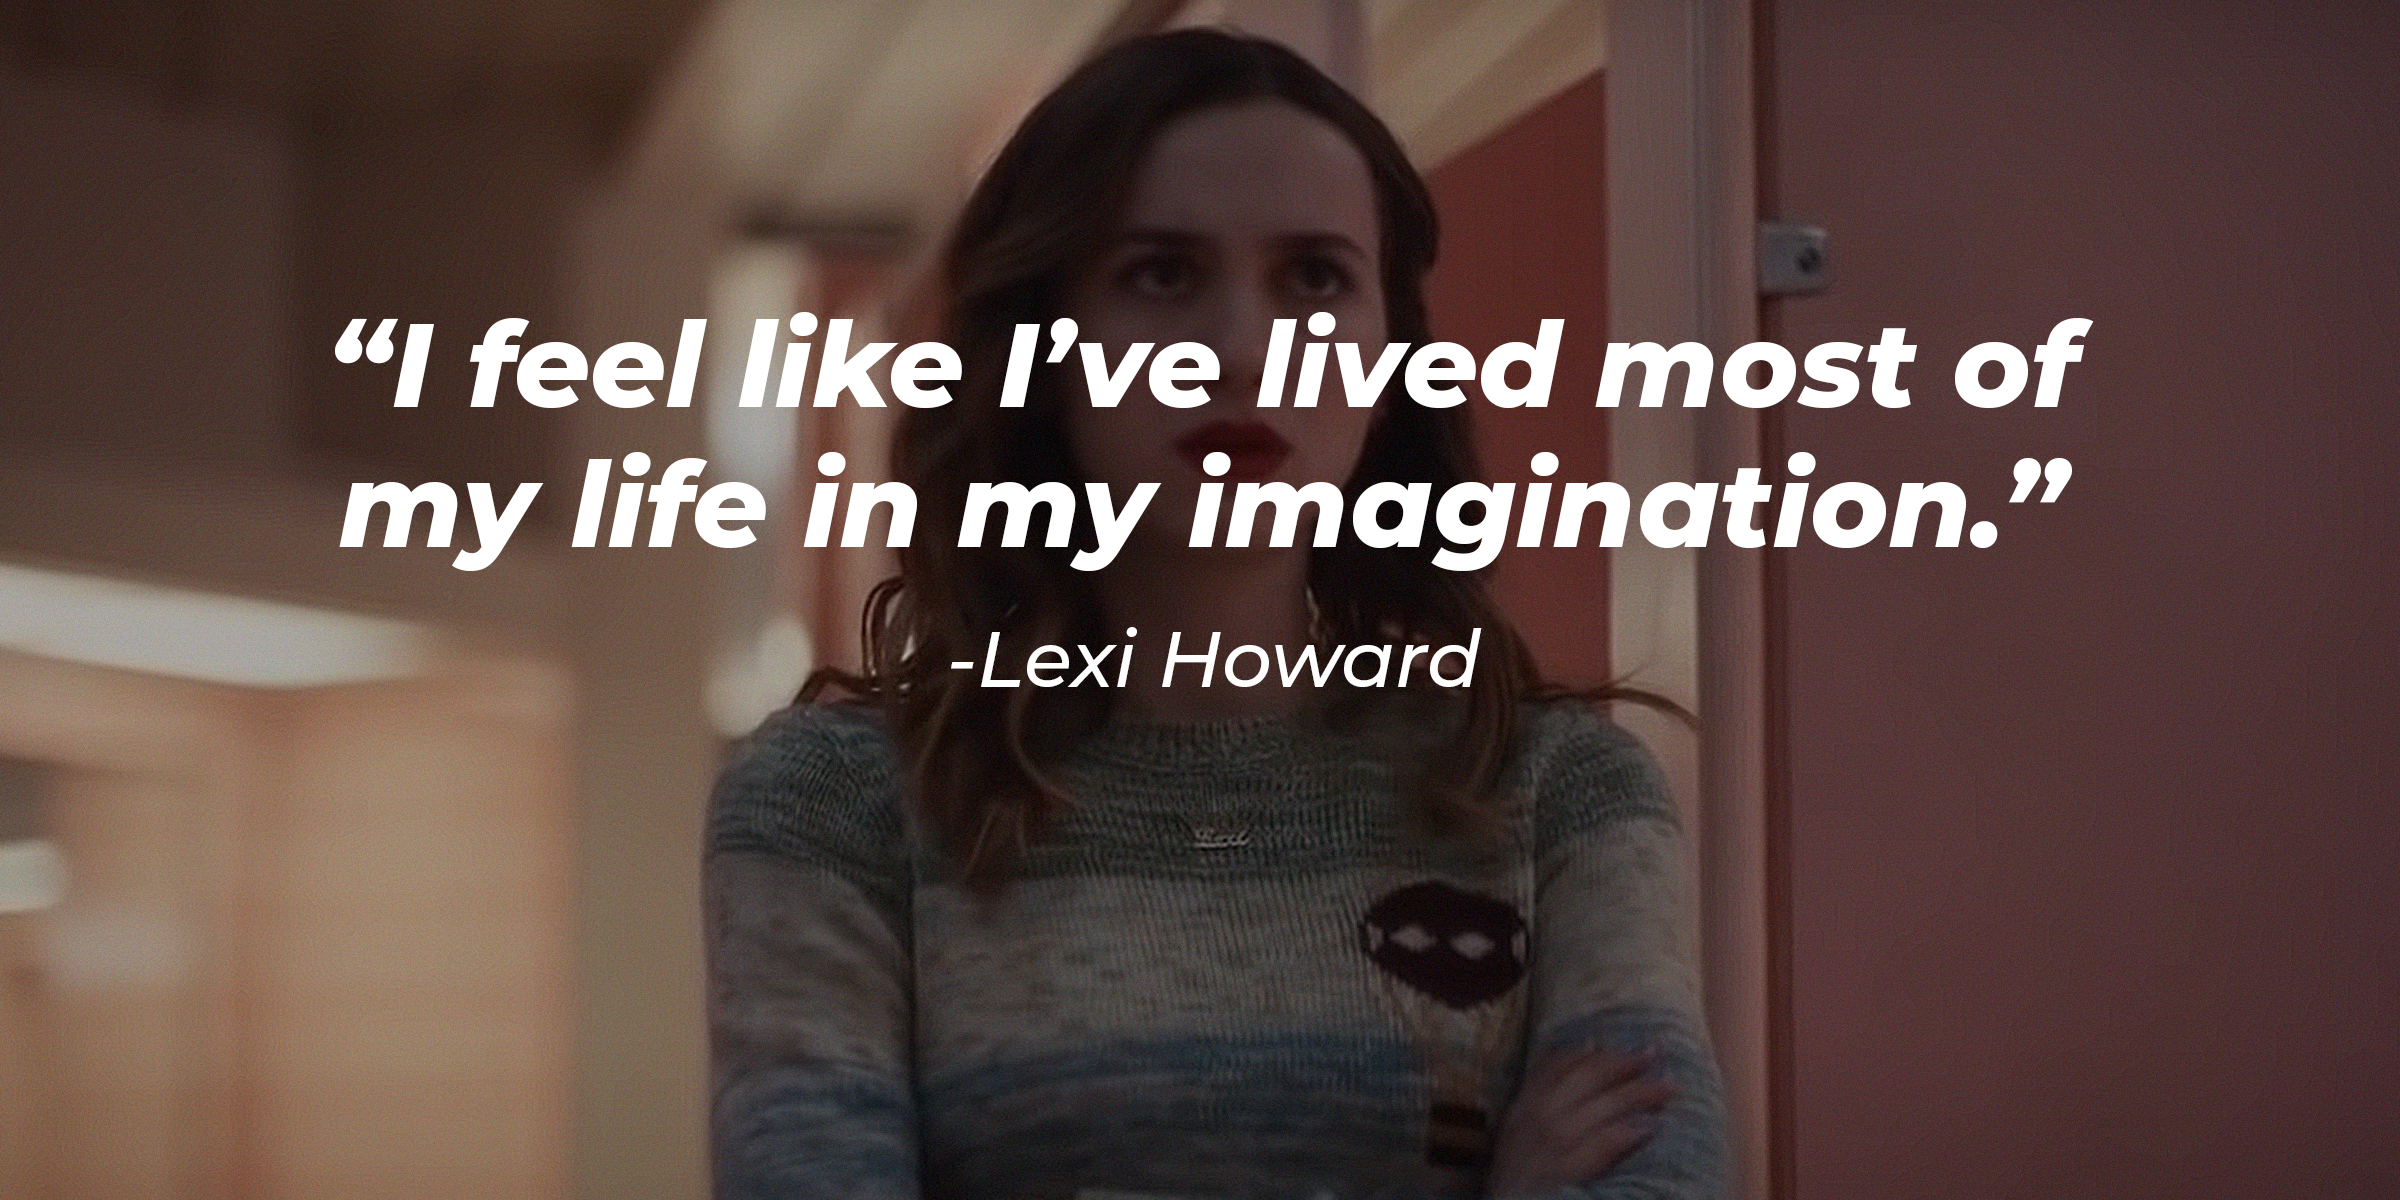 Lexi Howard, with her quote: “I feel like I’ve lived most of my life in my imagination.”| Source: youtube.com/OneMedia